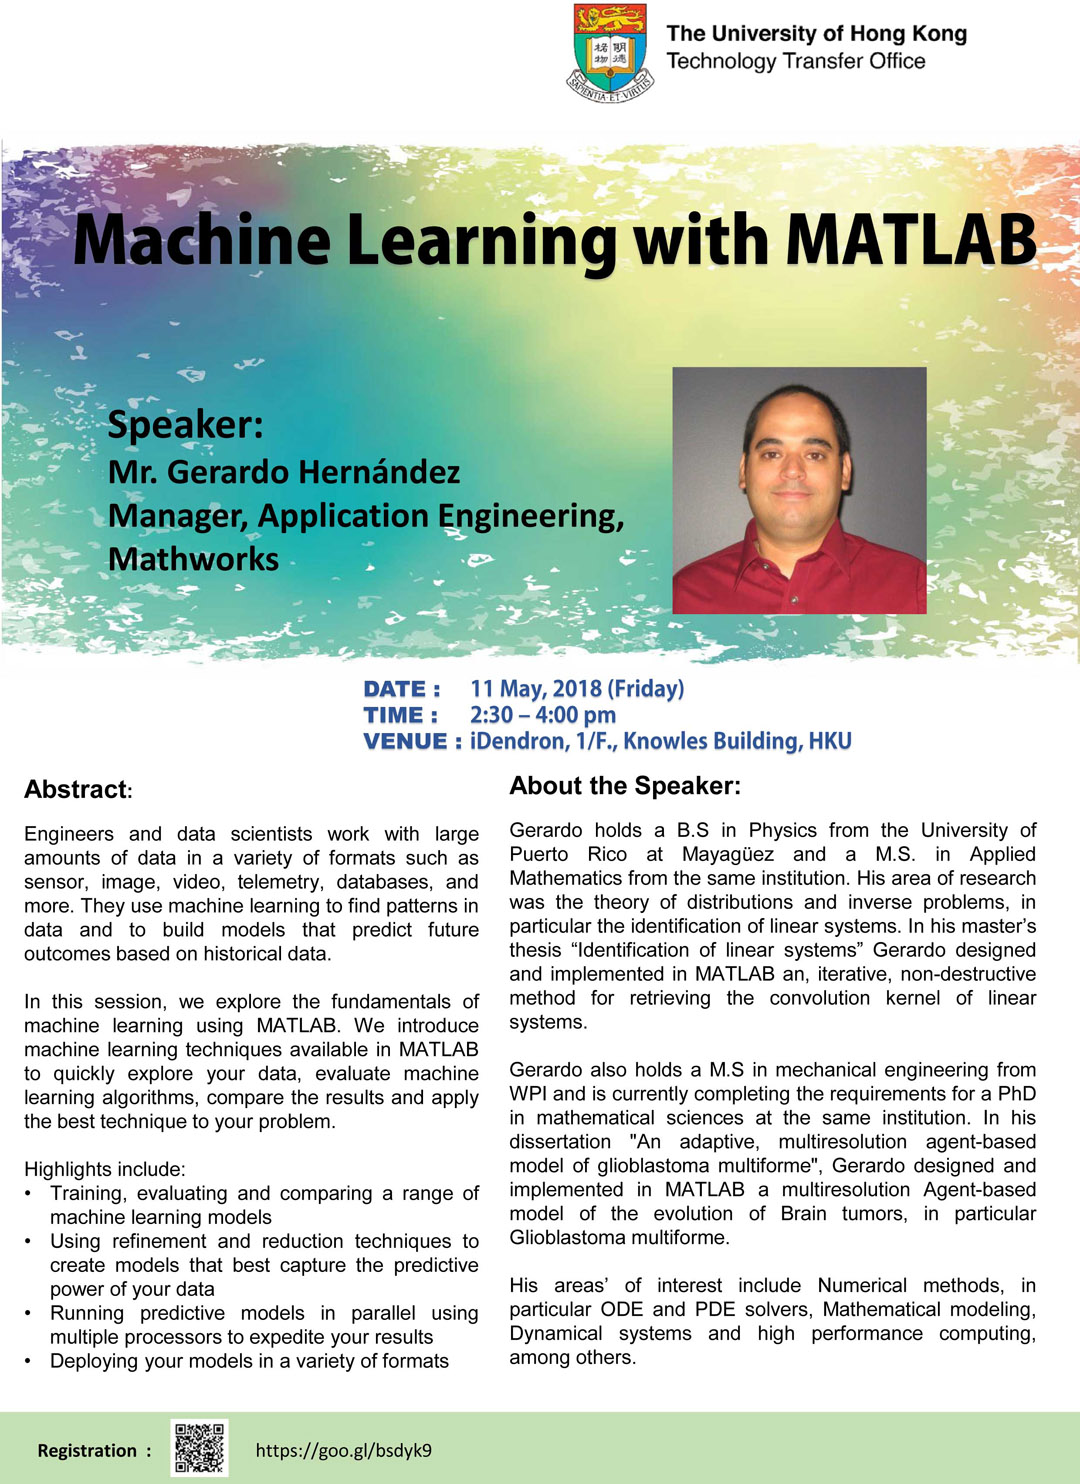 Machine Learning with MATLAB by Mr. Gerardo Hernández